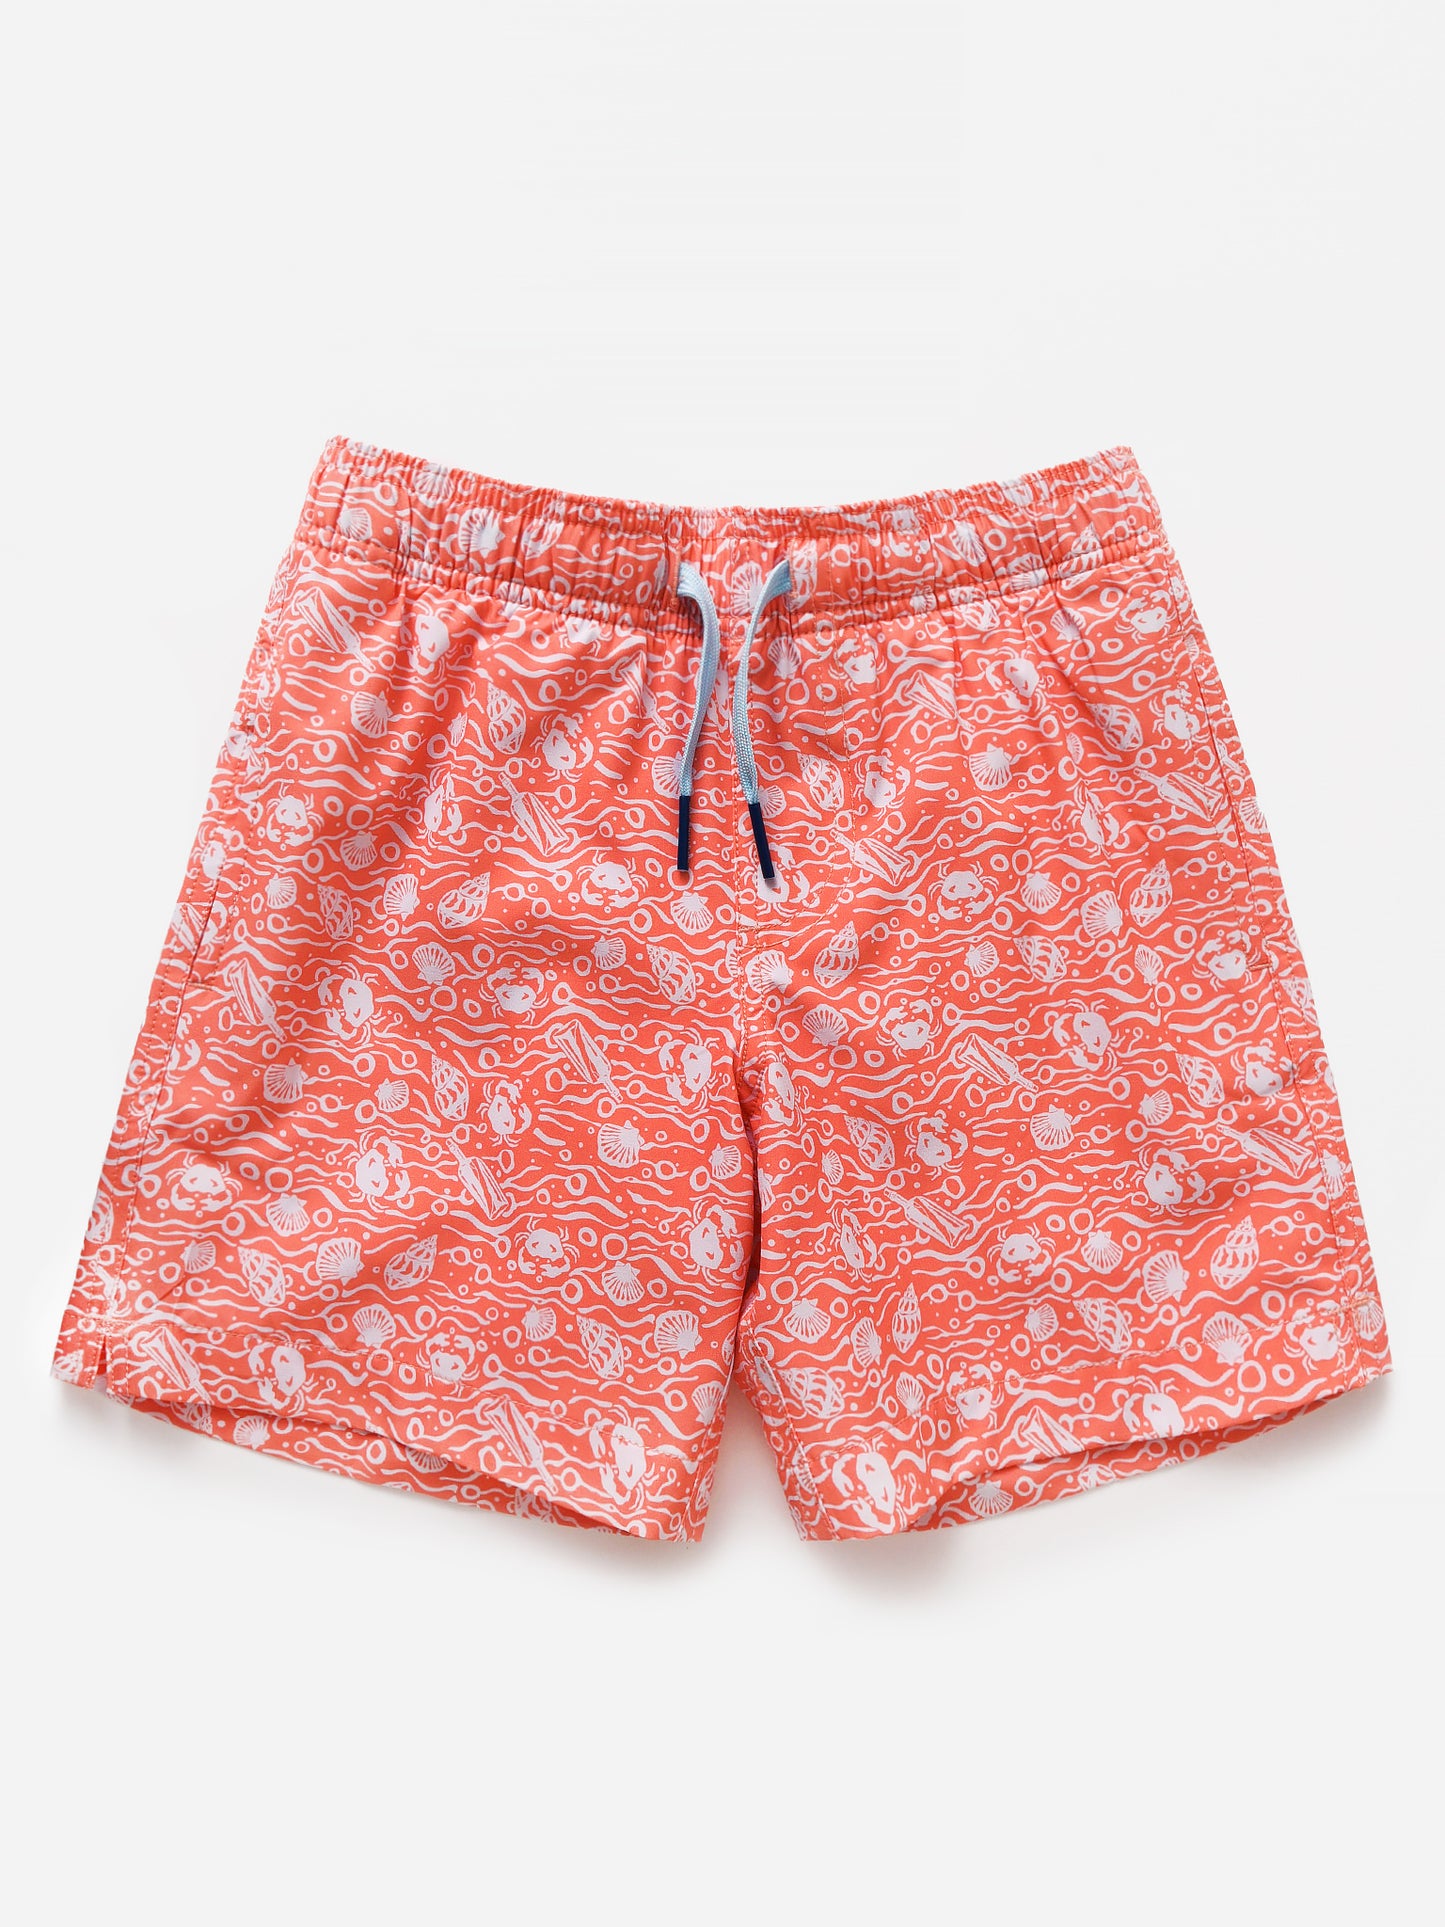 Southern Tide Boys' Shell of a Good Time Swim Trunk